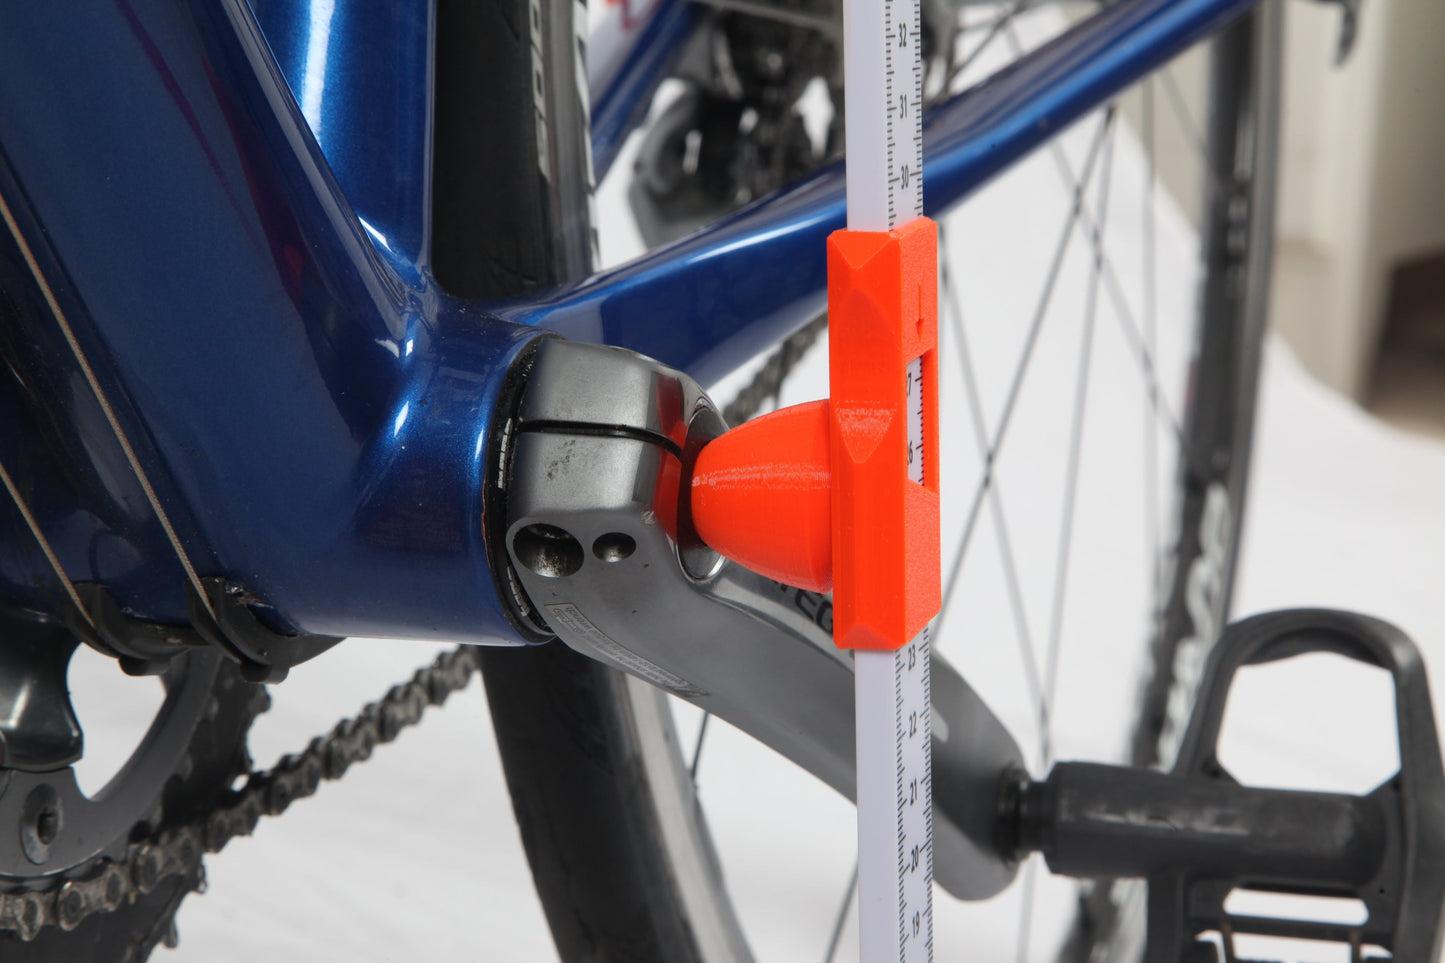 Bike Measurement and setup tool V6, now includes hands accessory!